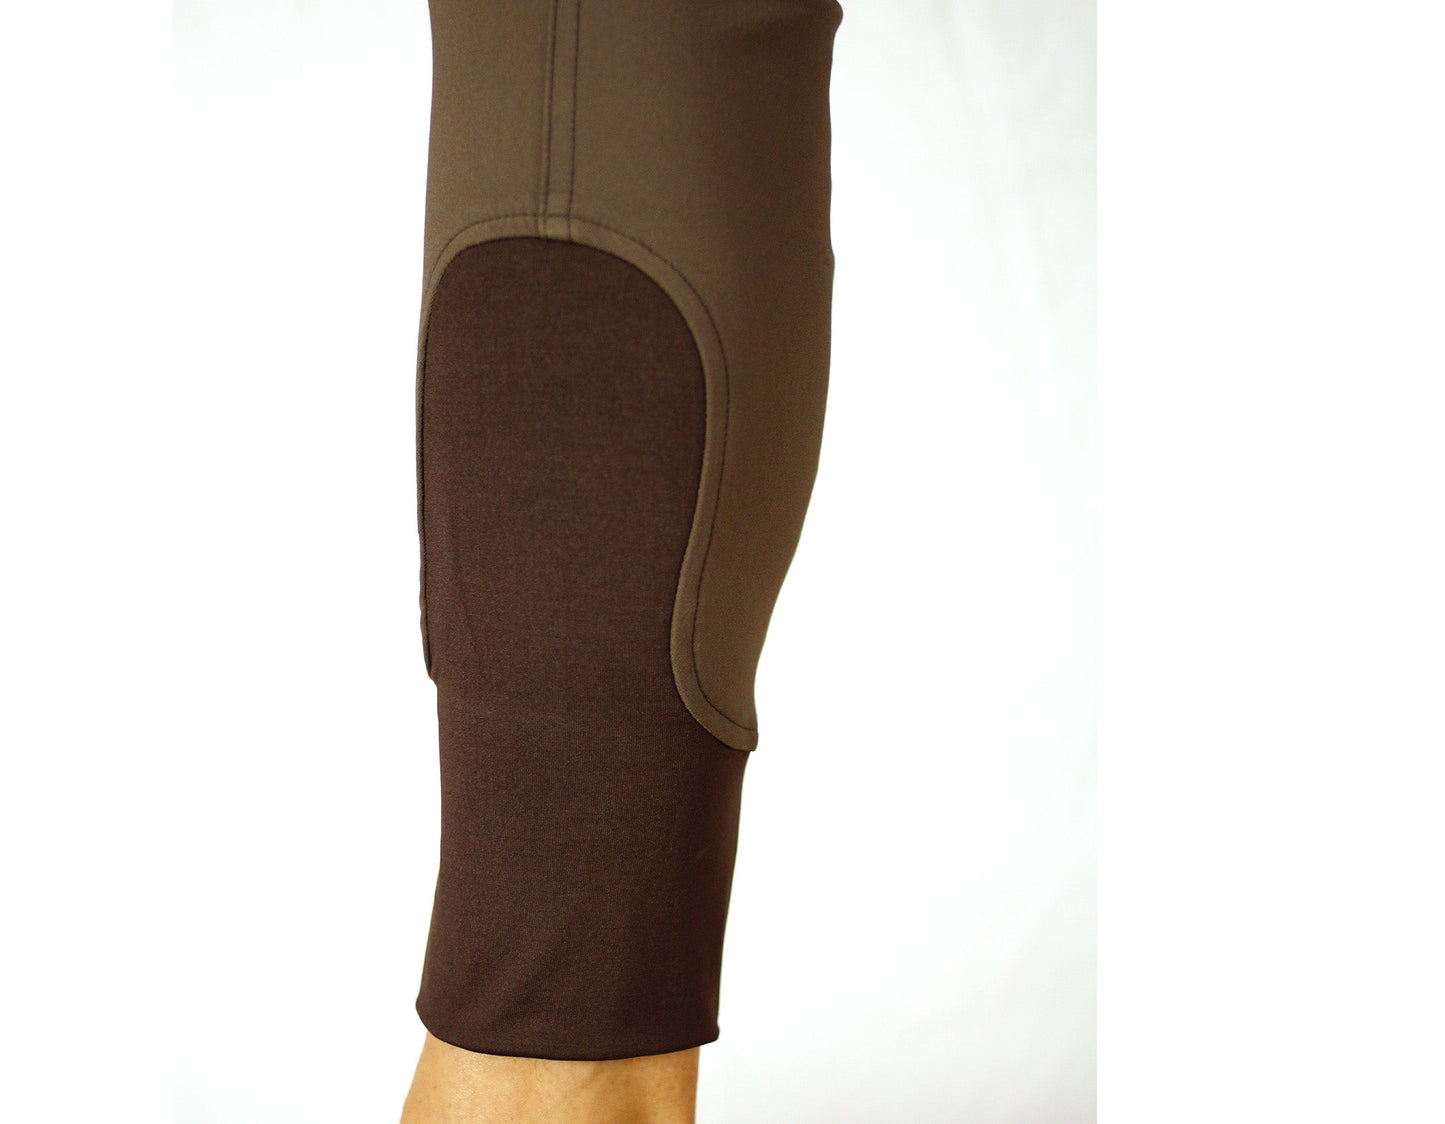 Bamboo breeches in Brown - Final run out, Last sizes-Plum Tack-The Equestrian